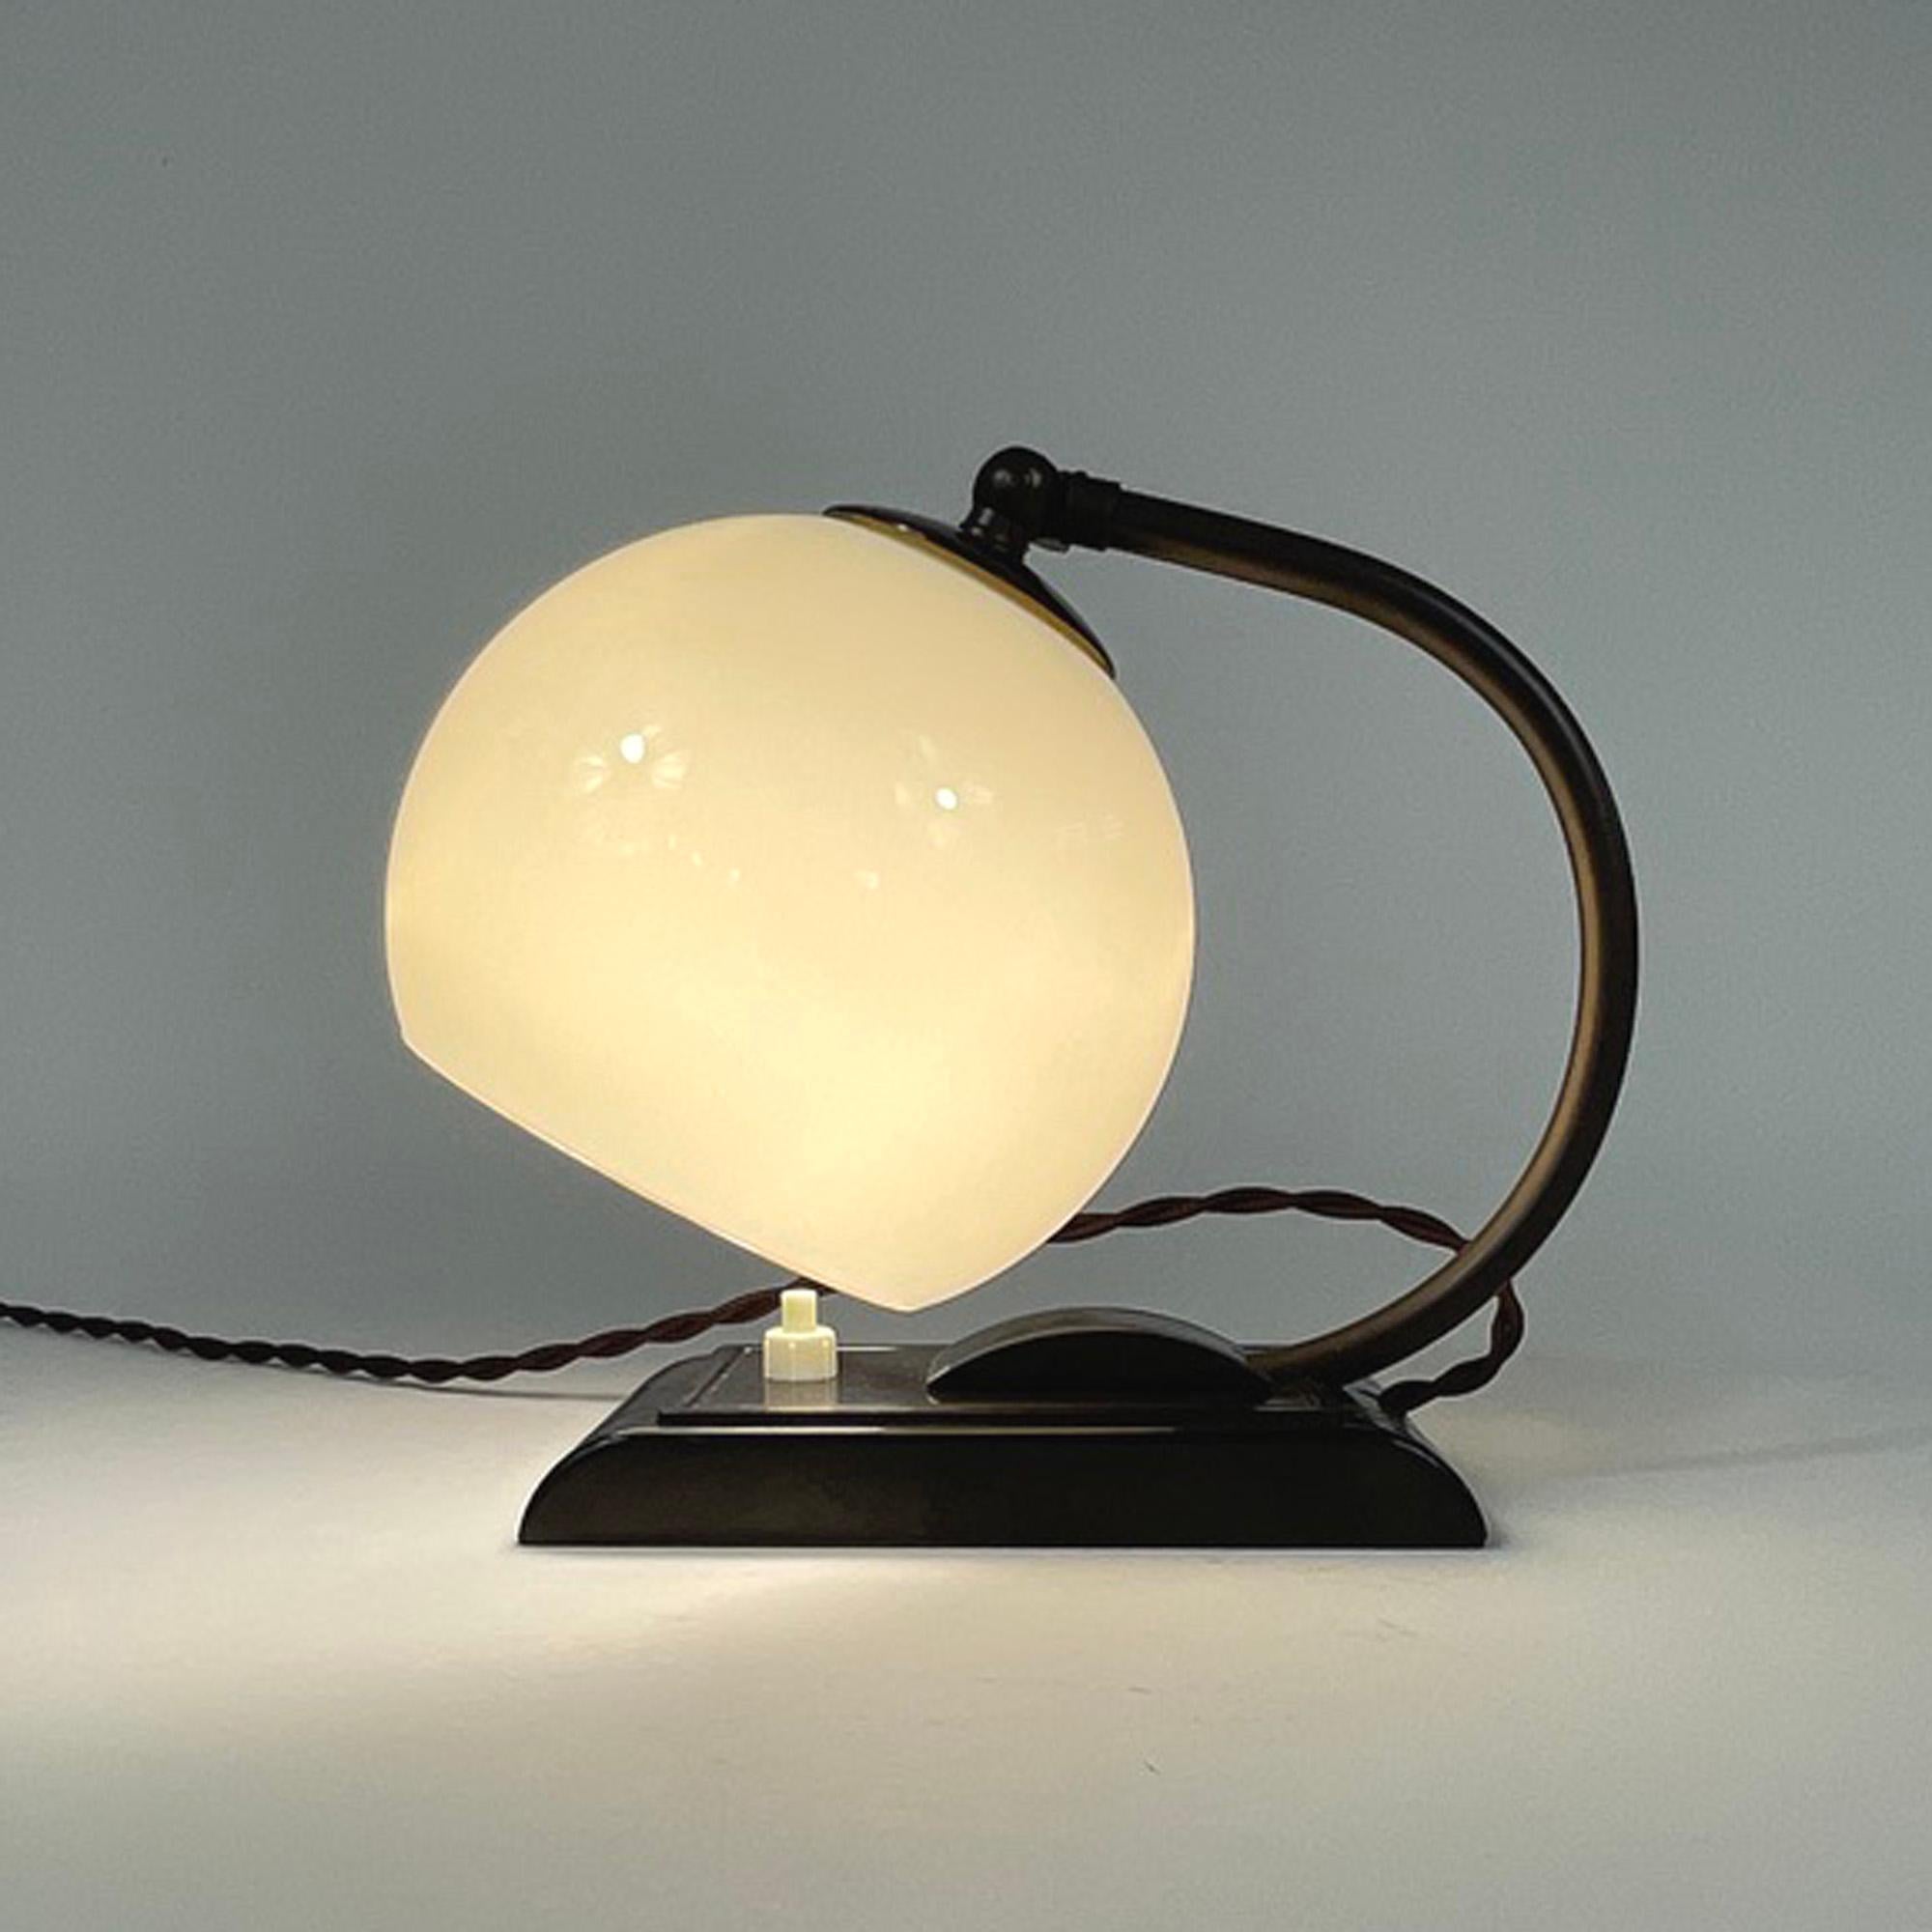 Art Deco Streamline Design Bakelite and Opaline Table Lamp, 1920s to 1930s For Sale 5